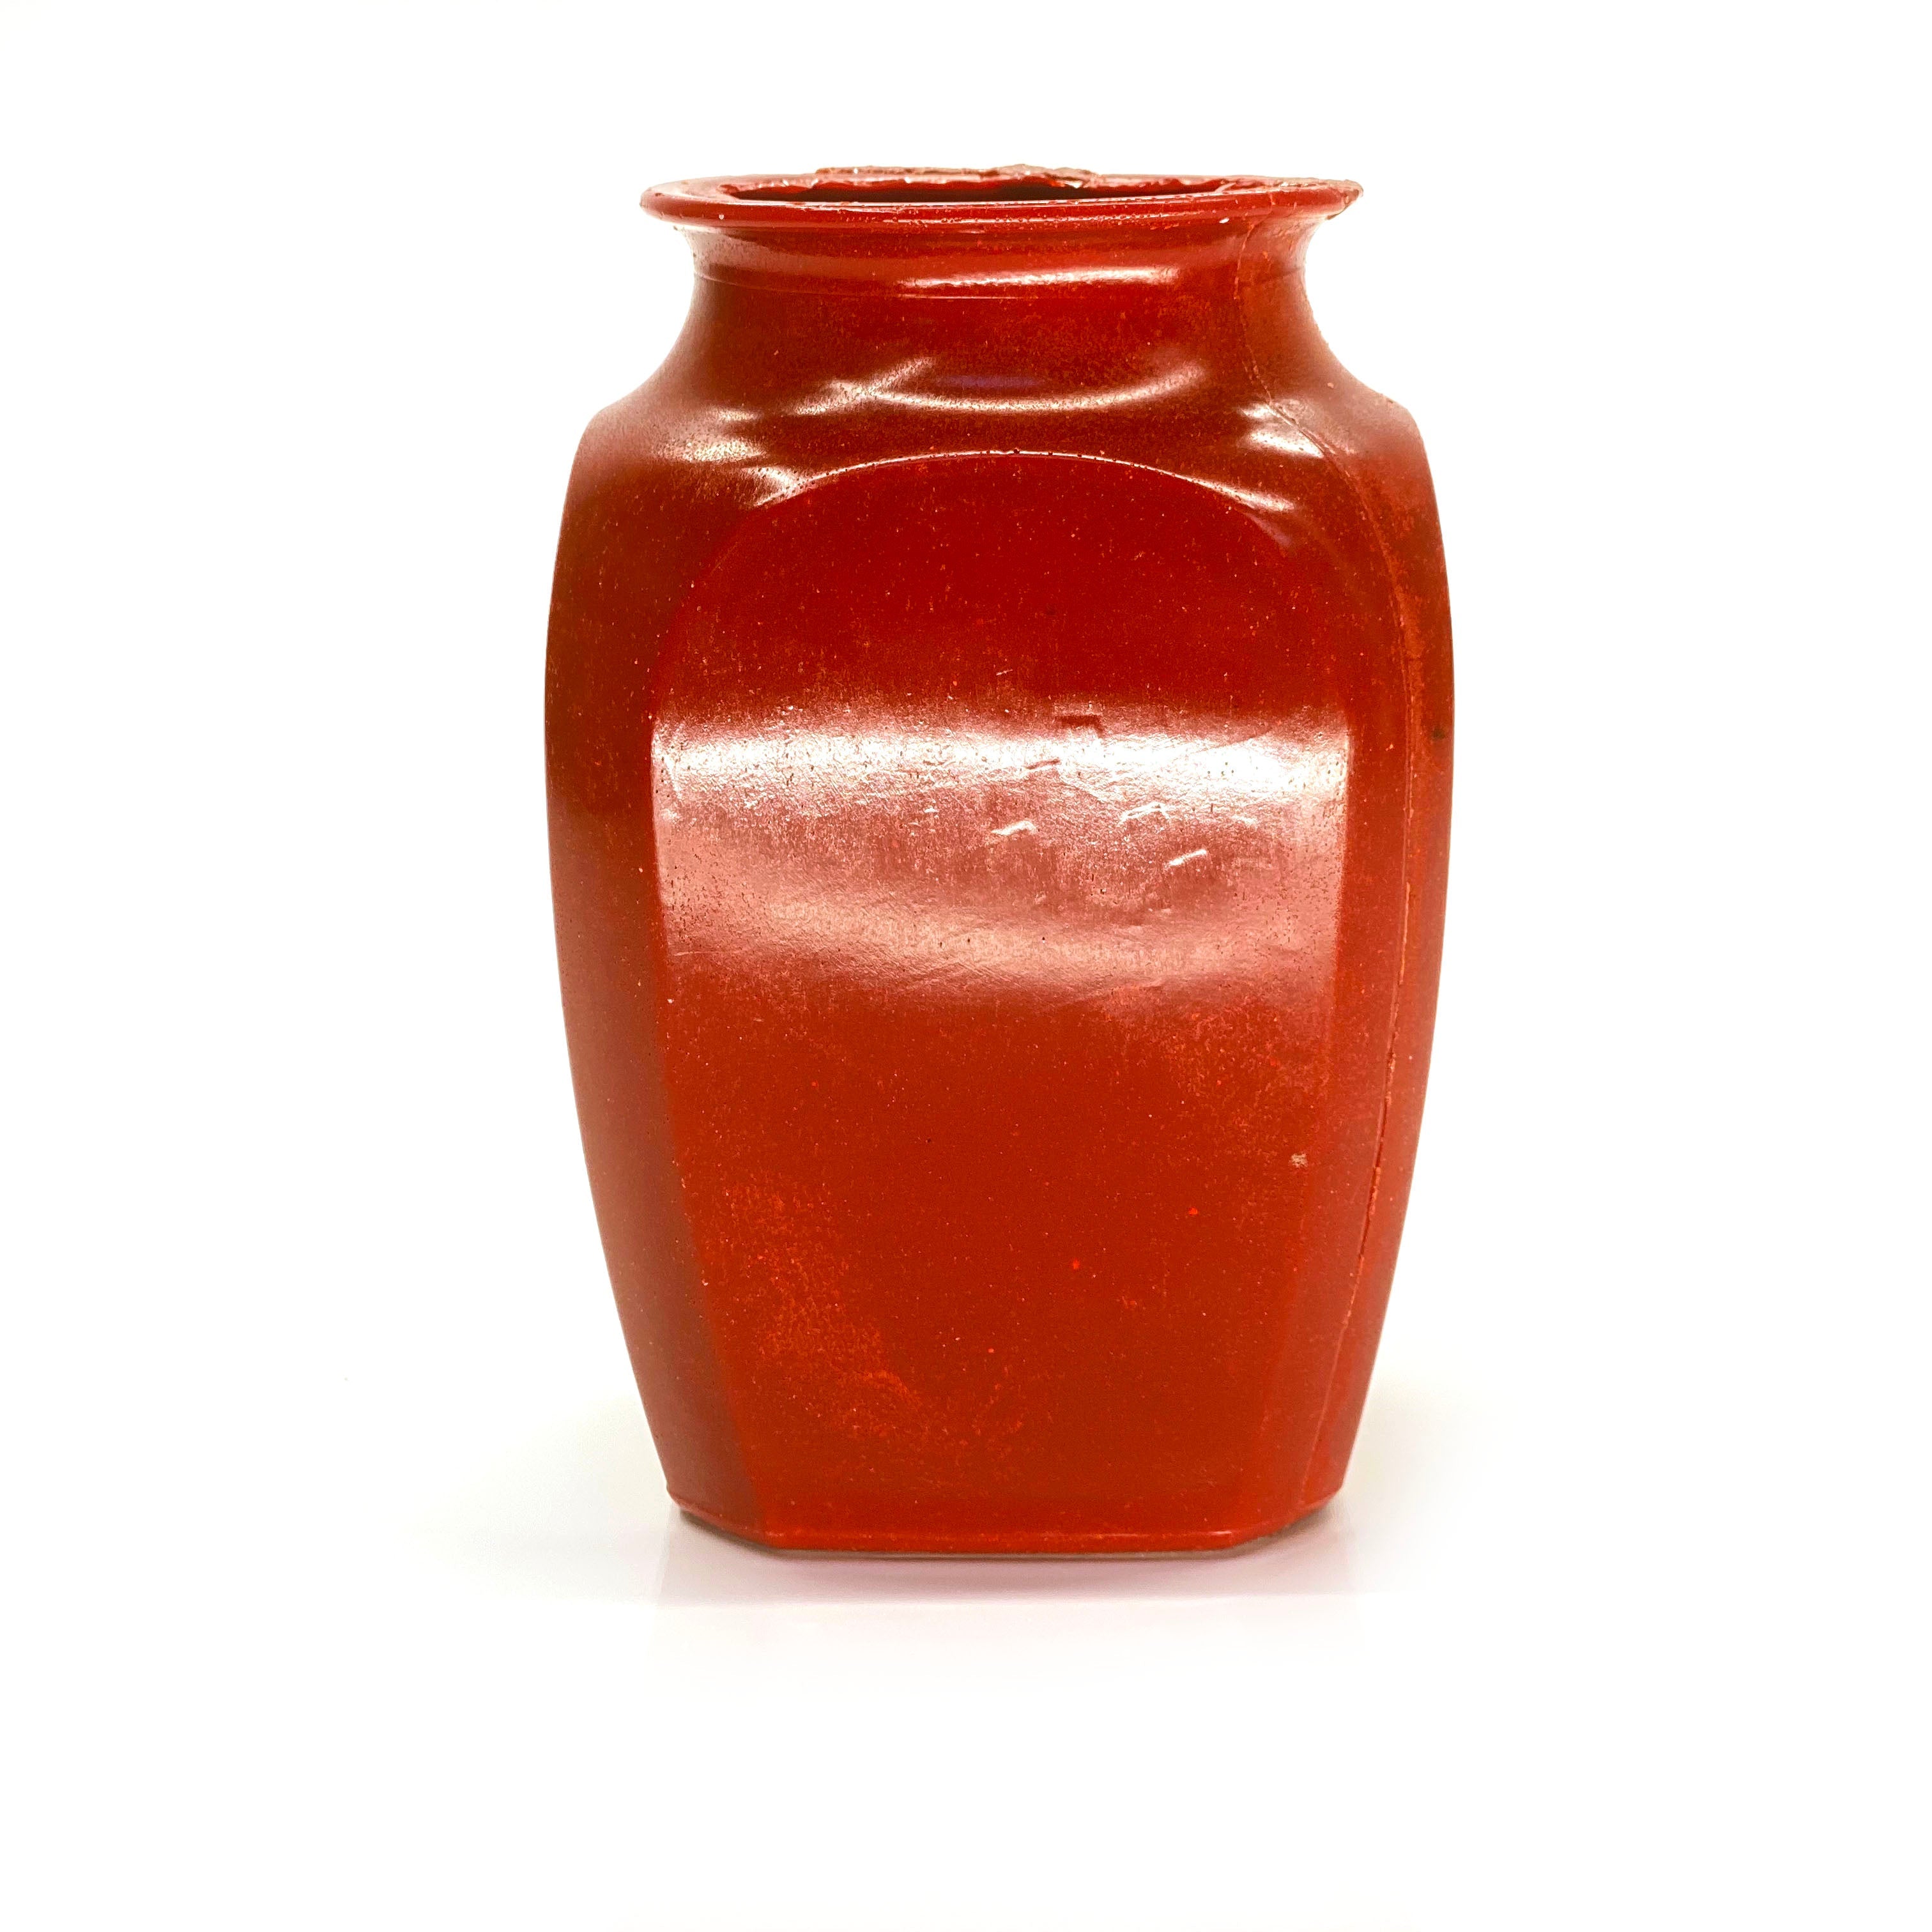 SMASHProps Breakaway Square Sided Vase or Urn - RED opaque - Red,Opaque